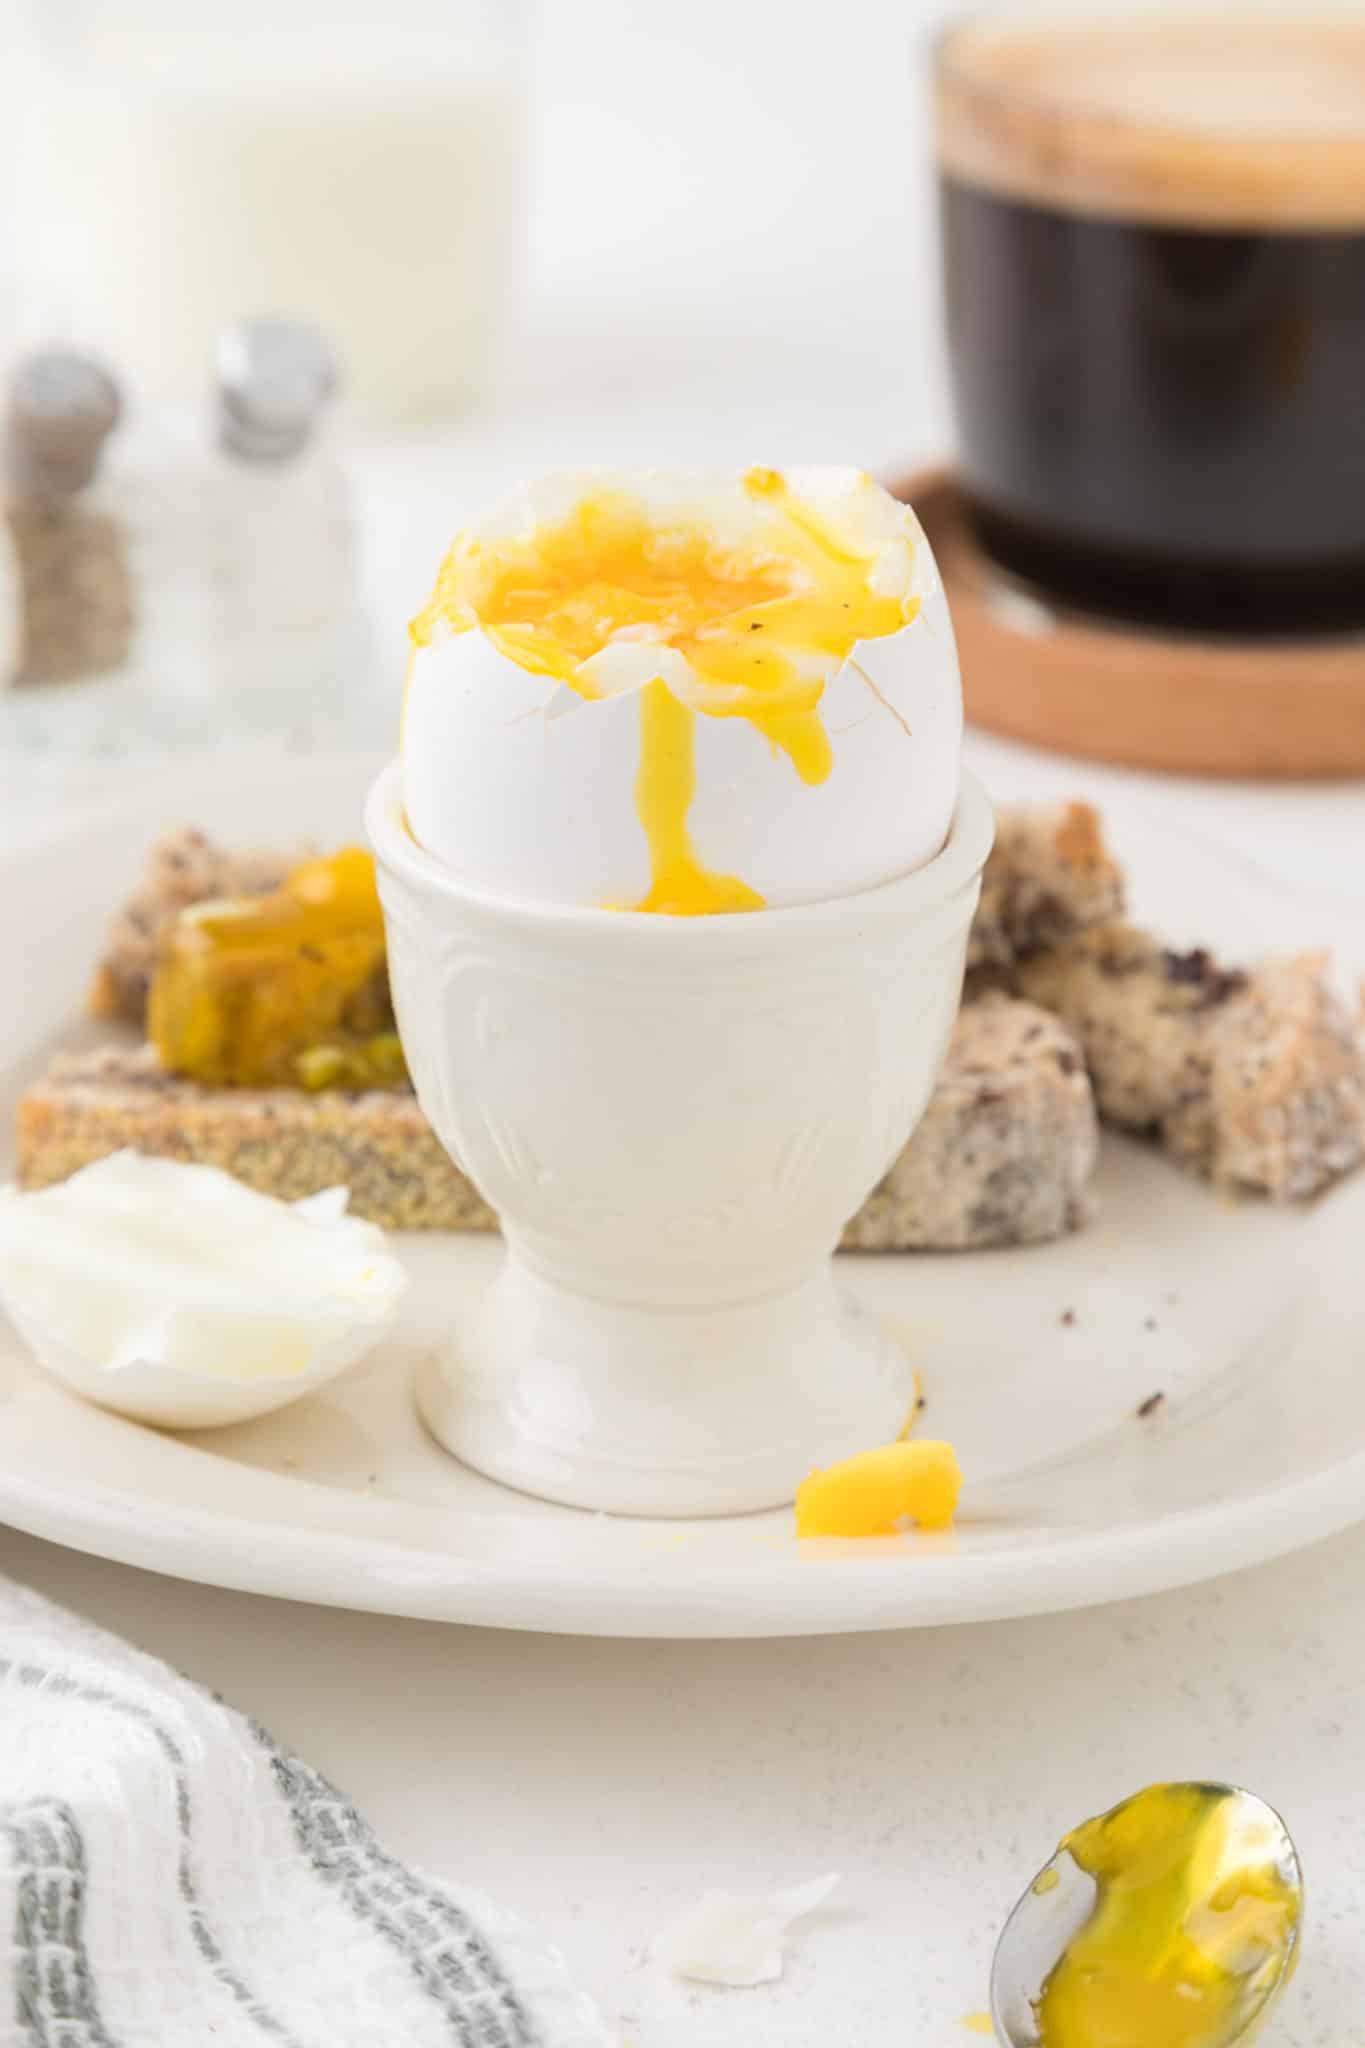 soft boiled egg served in an egg cup